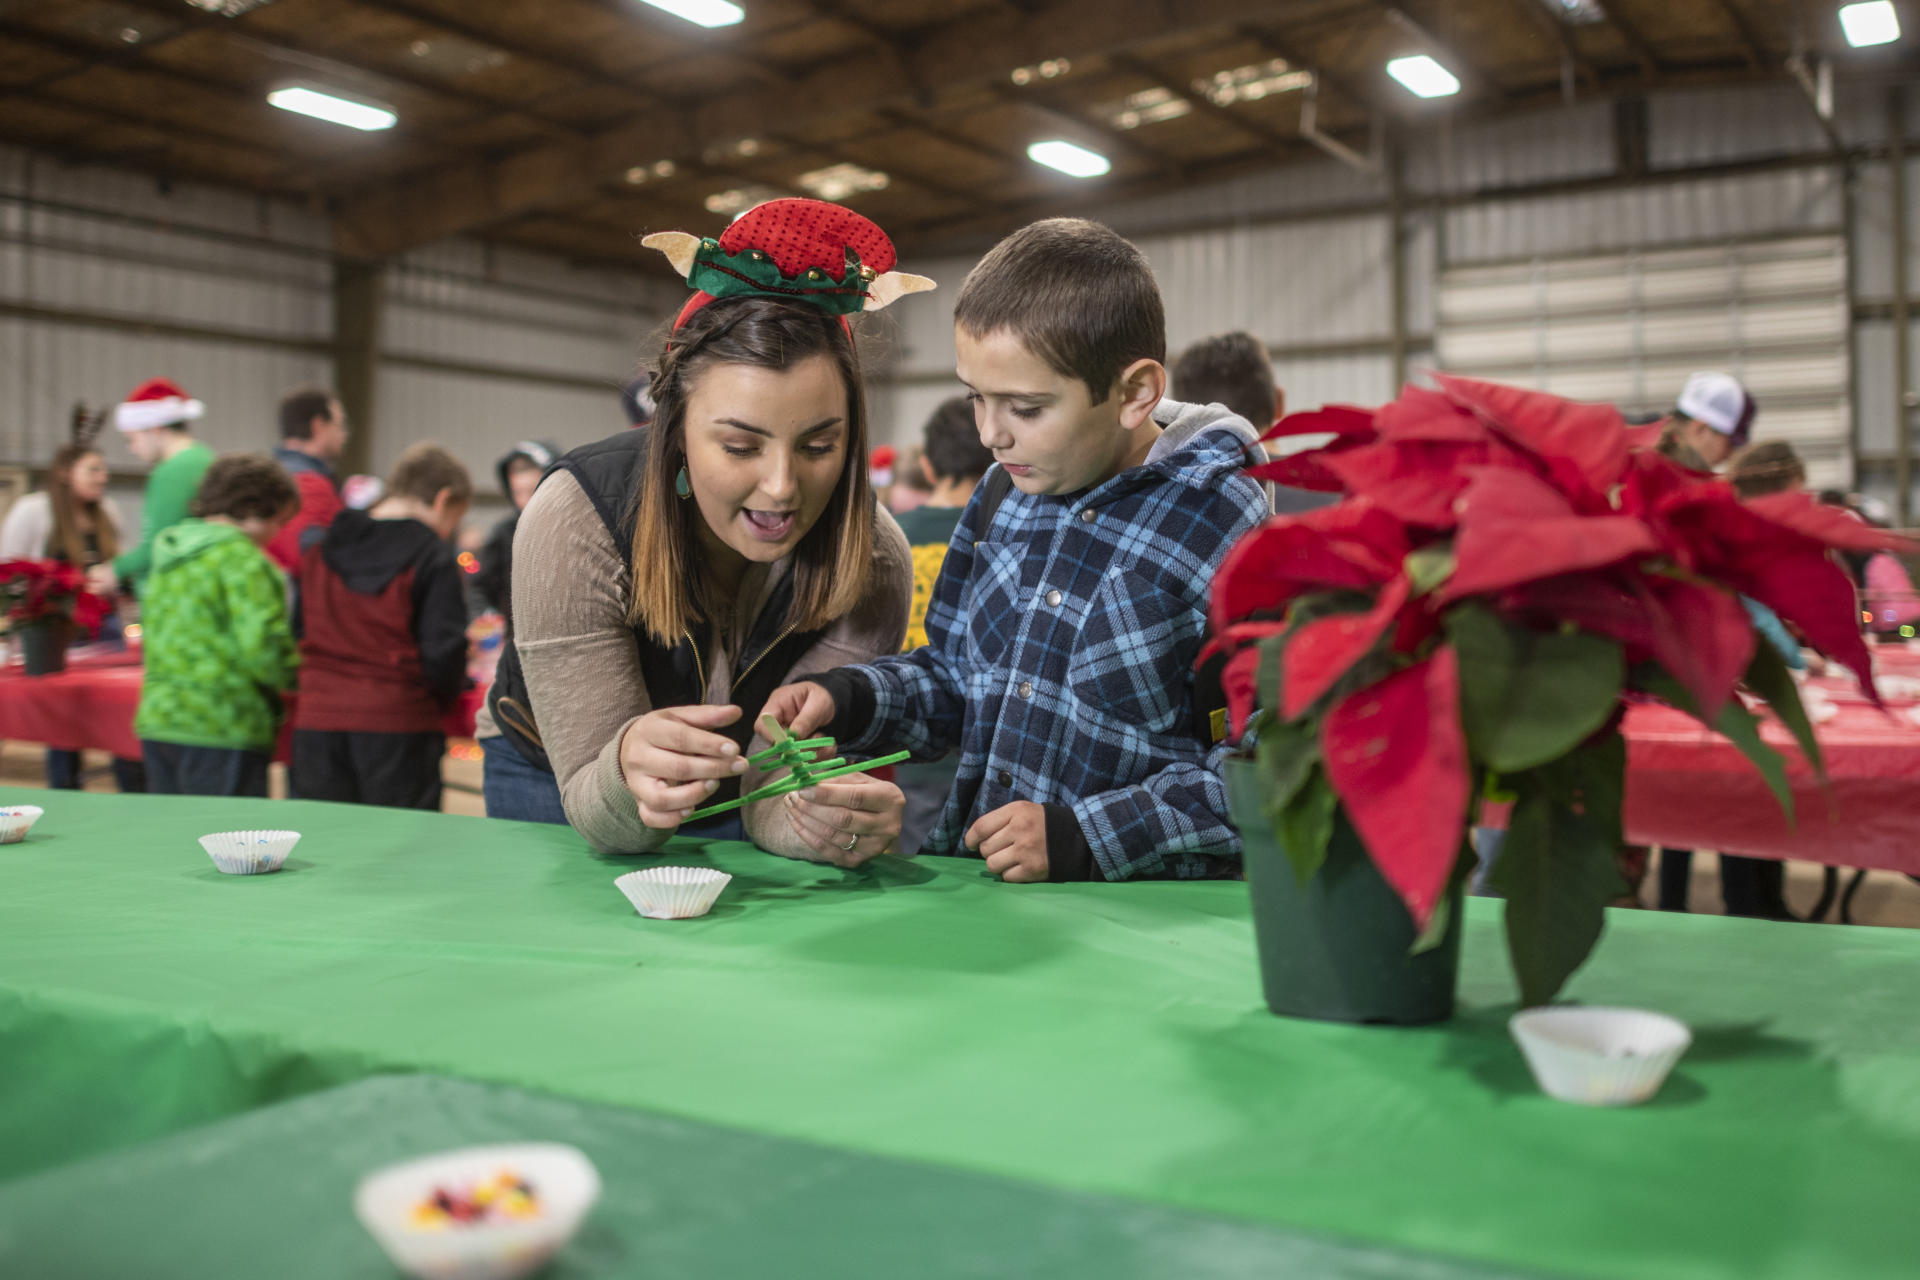 A student helps a young boy make a Christmas tree out of green pipecleaners.